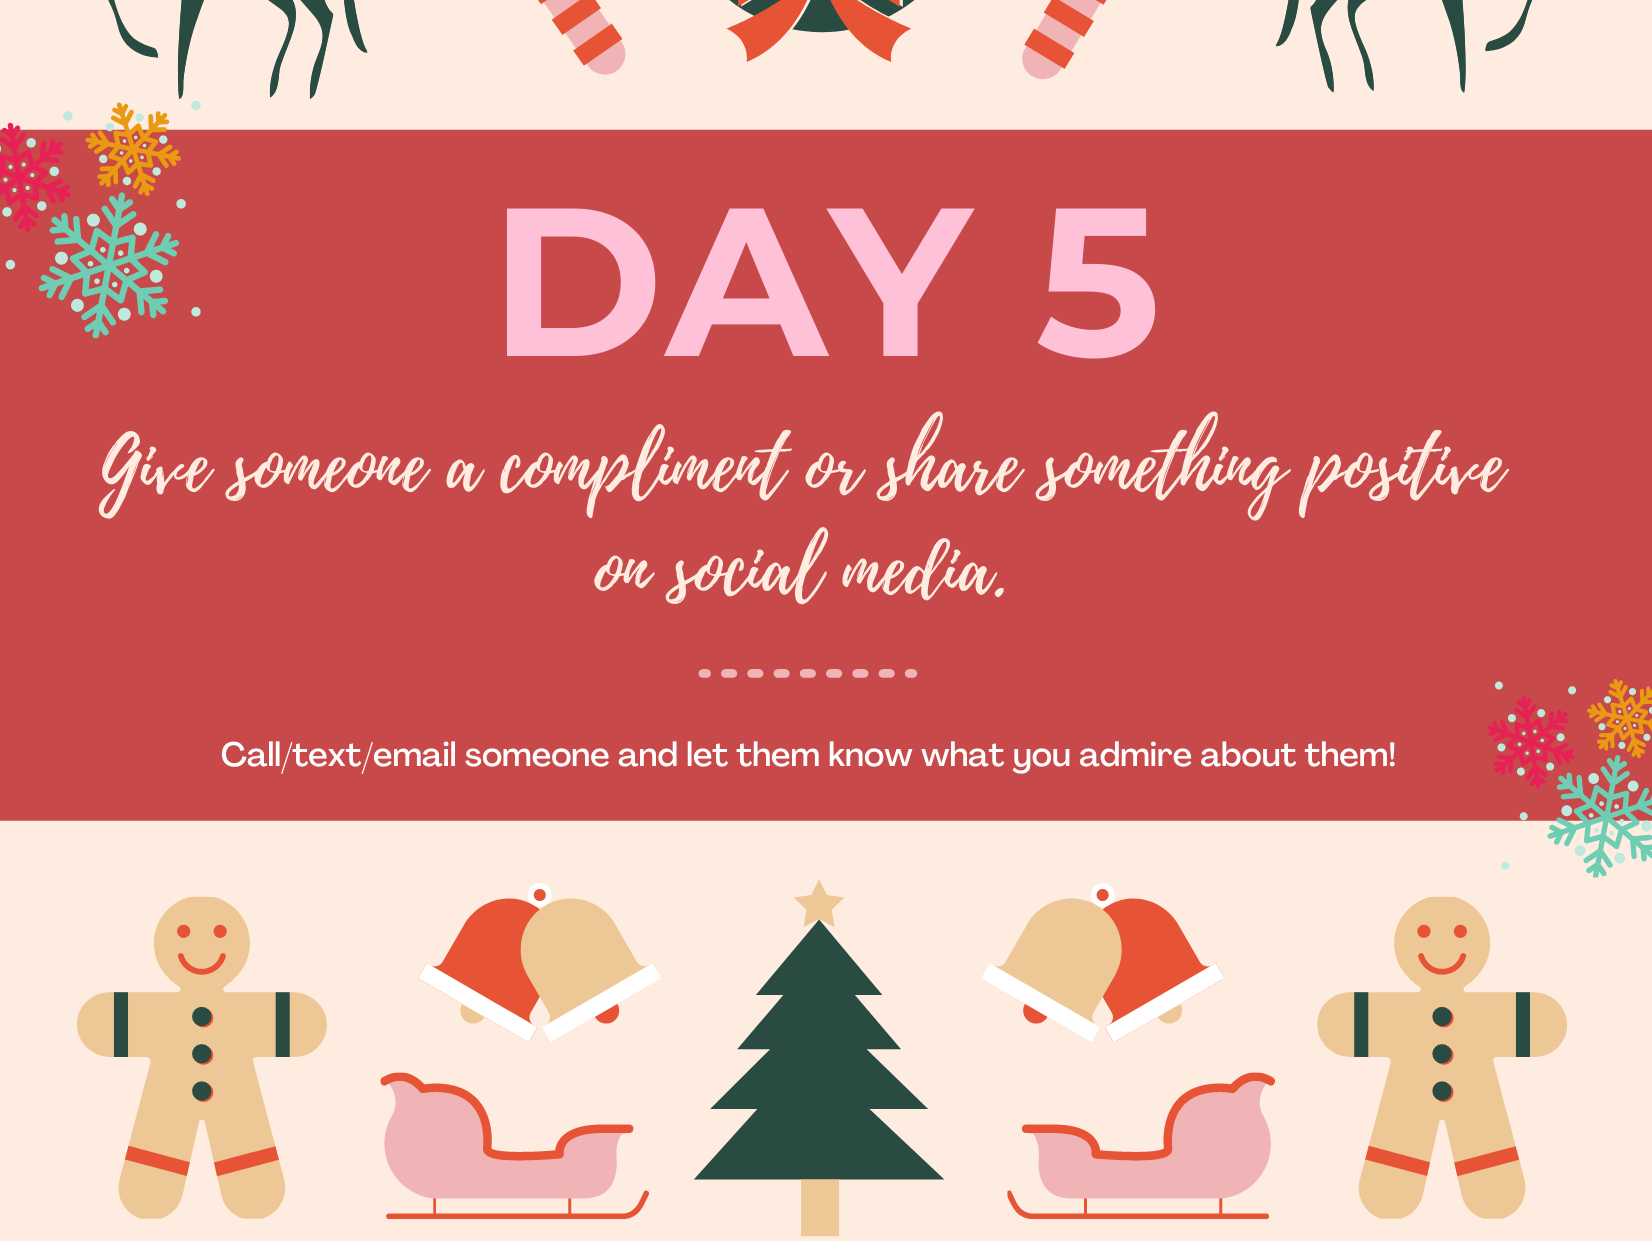 7 Days of Kind Acts!